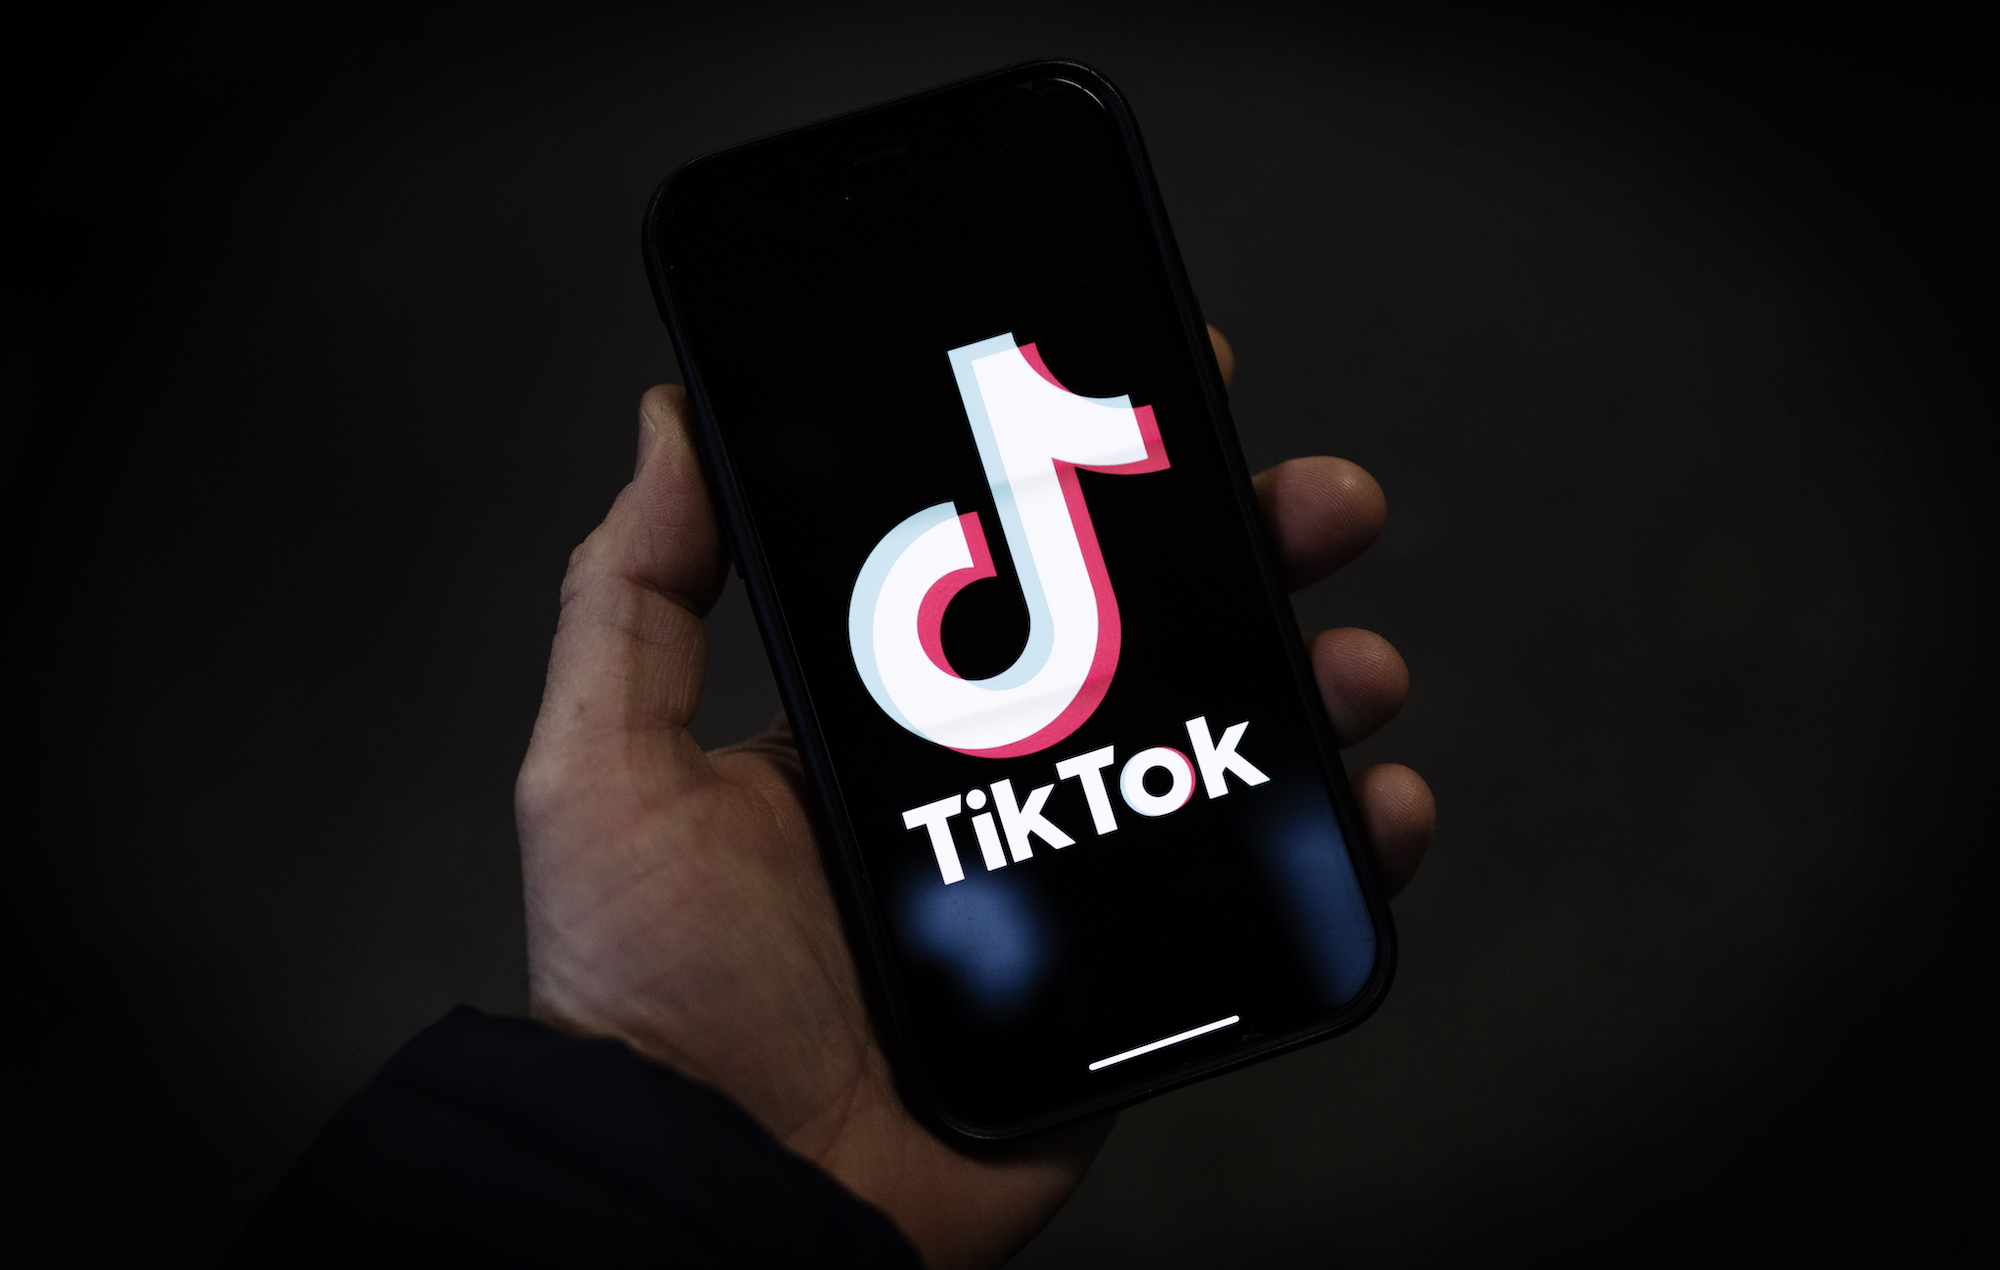 TikTok is the most popular news source for 12-15-year-olds, says Ofcom